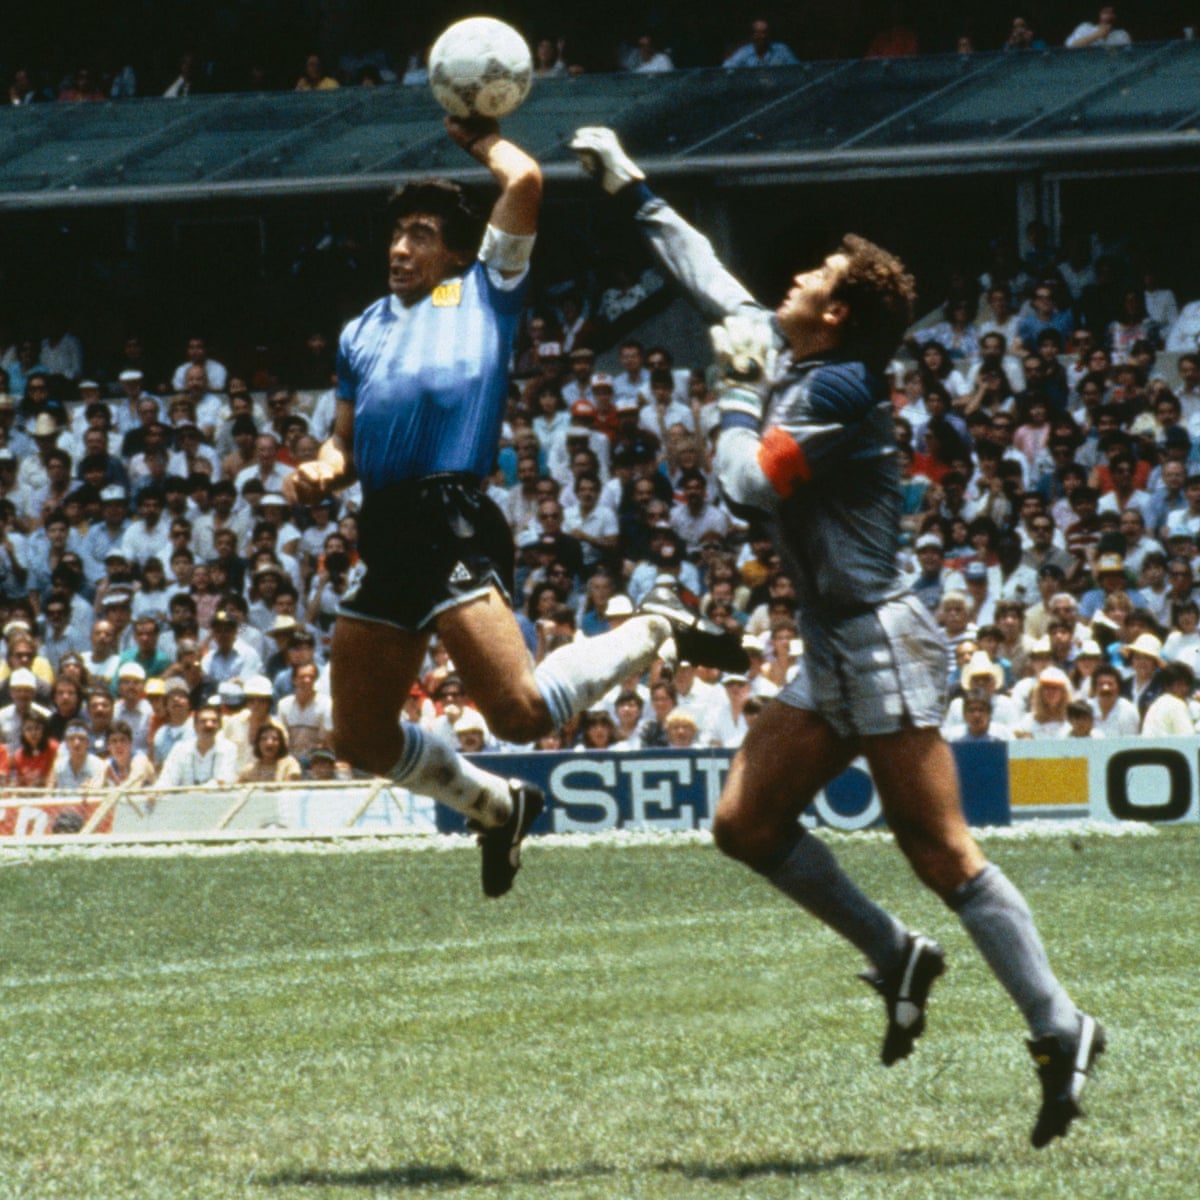 If you want to understand Trump declaring victory, it's important to understand this was pioneered in 1986 by Diego Maradona.Maradona realized that if he could get his teammates to celebrate his illegal  #HandOfGod world-cup goal, referees wouldn't have the "huevos" to undo it.